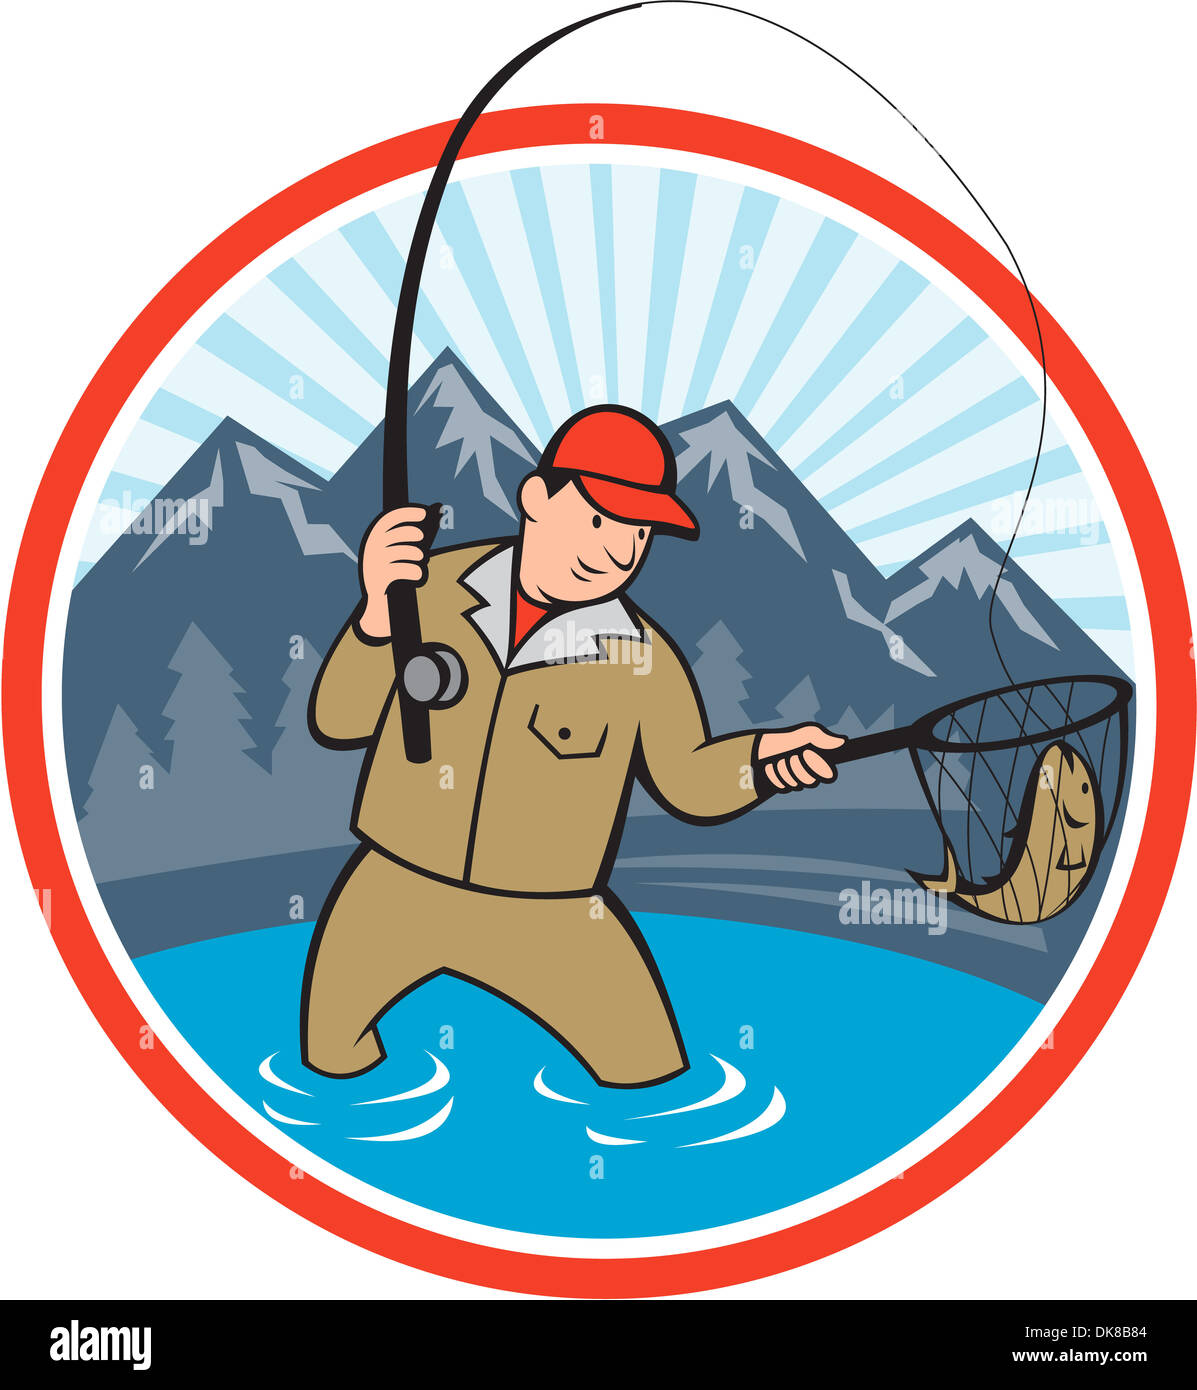 Illustration of a fly fisherman with fly rod and reel reeling and